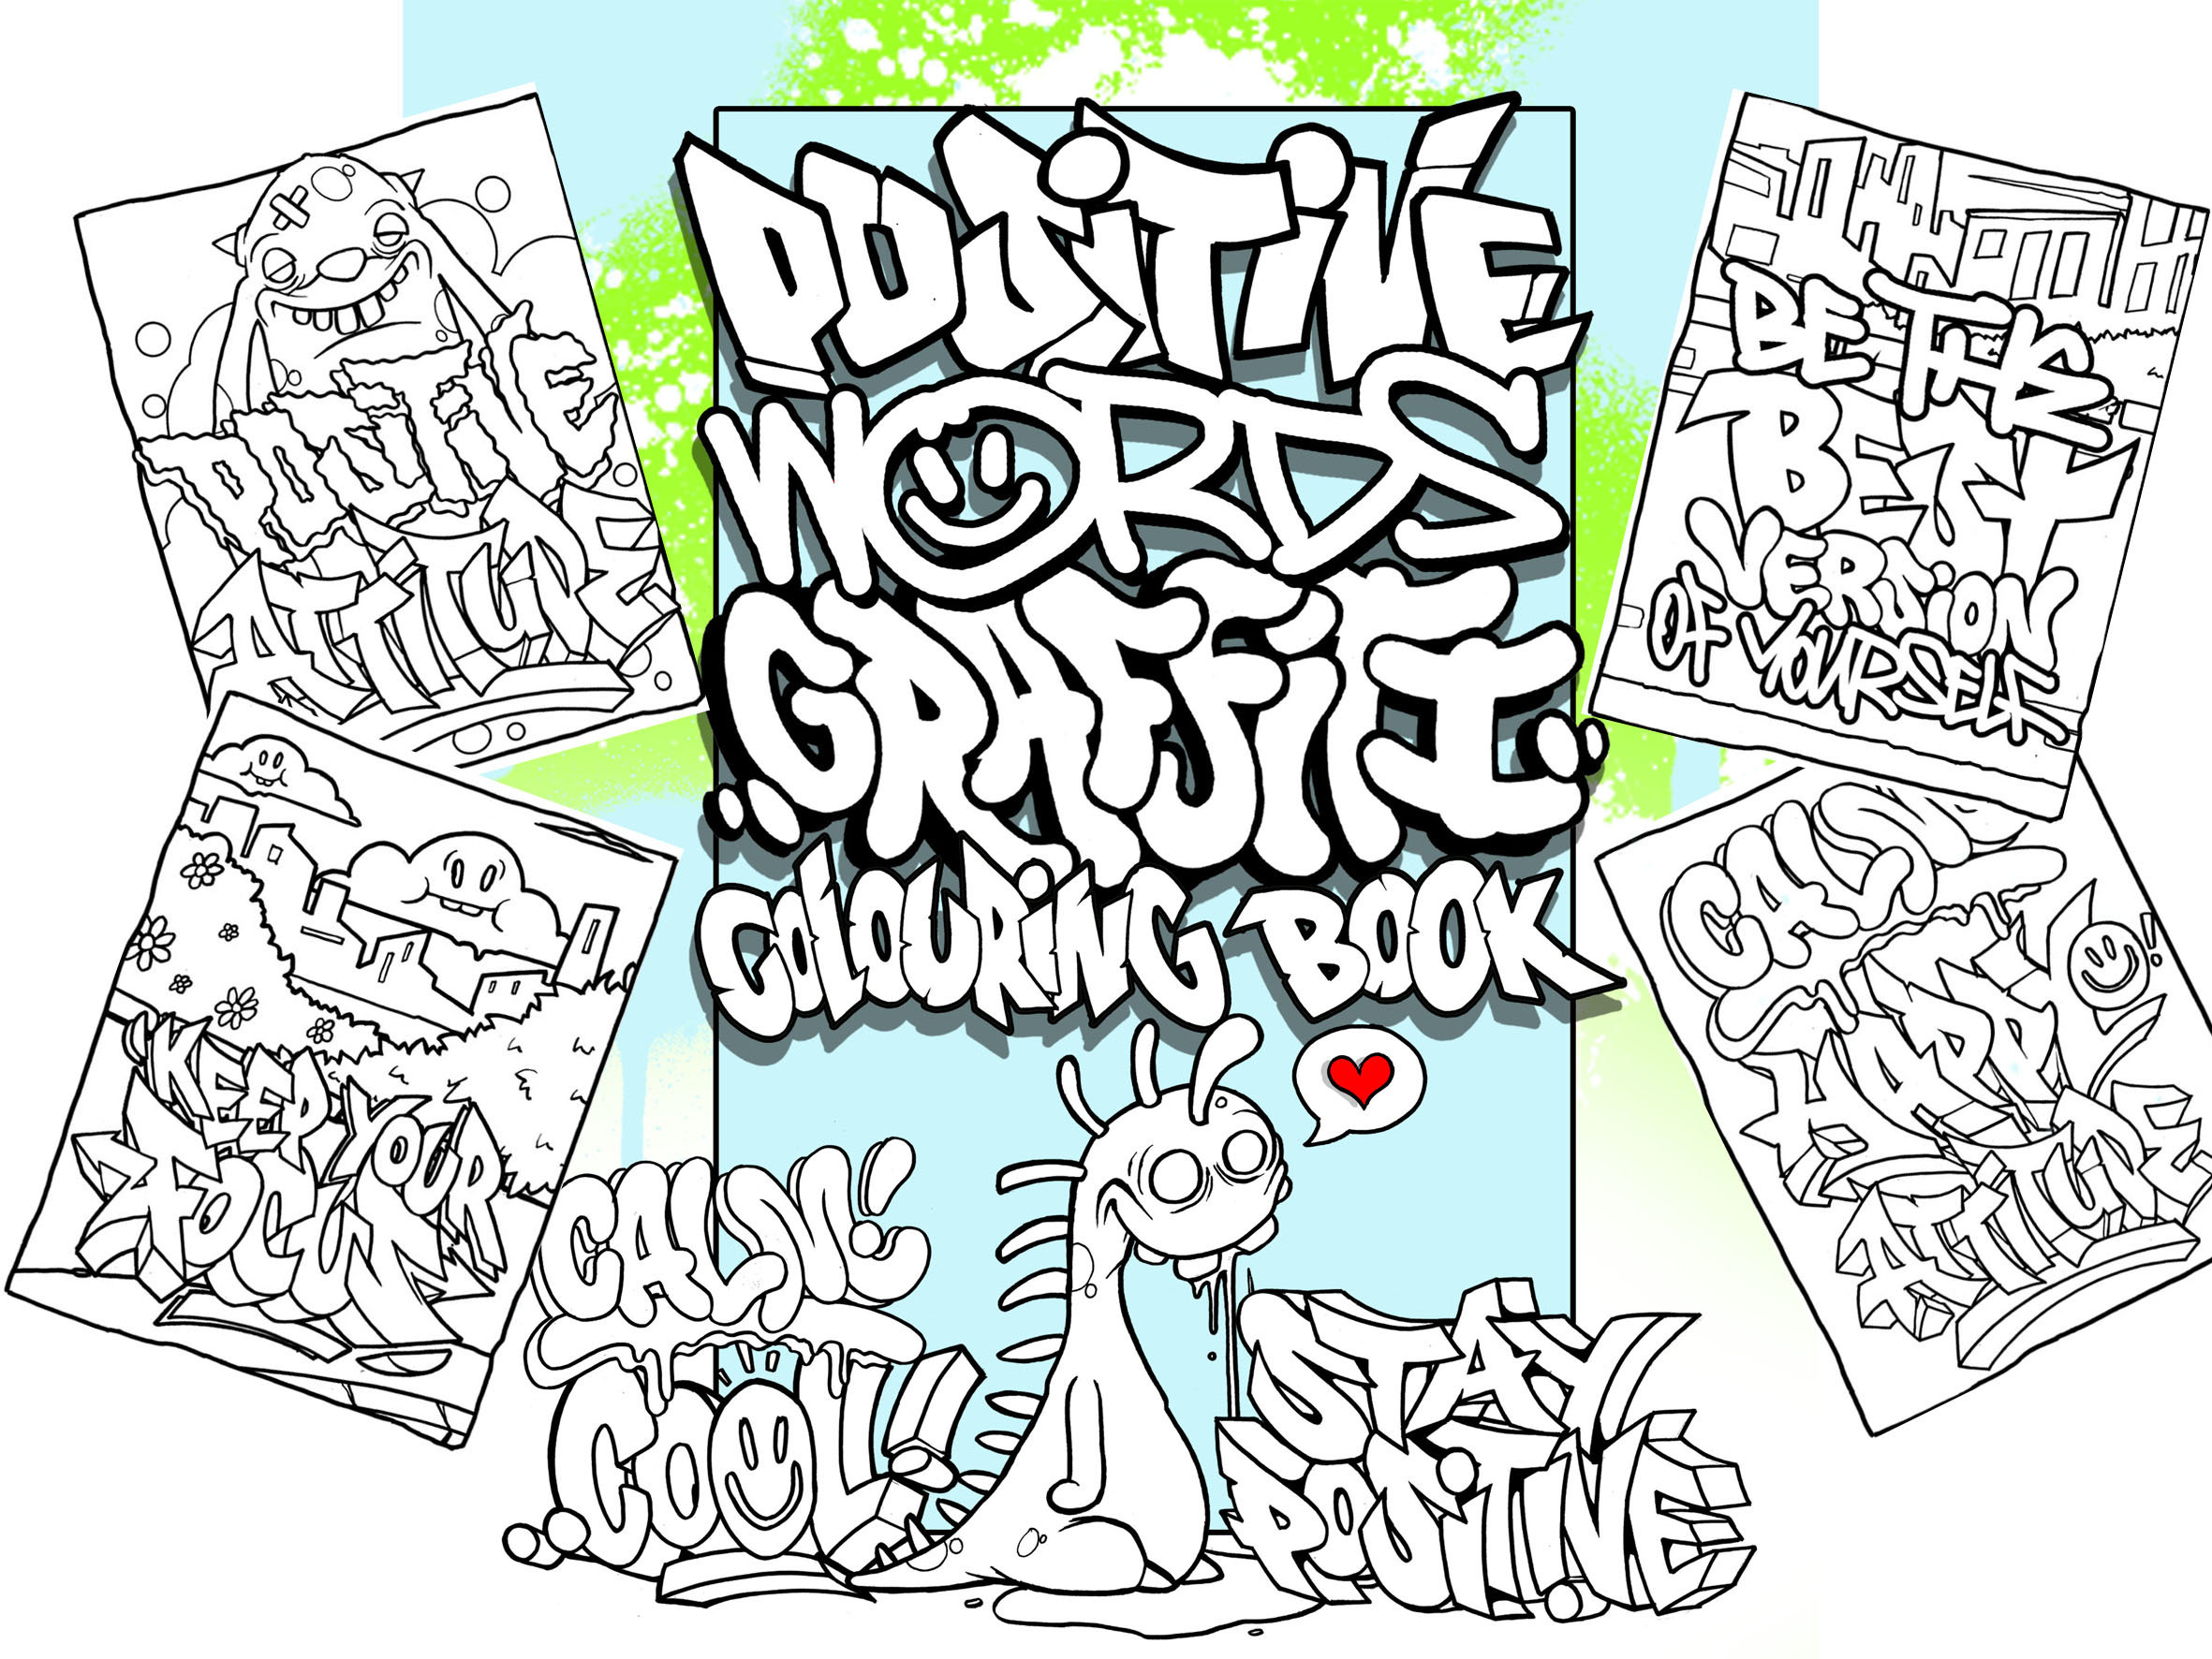 Positive Words Graffiti Colouring Book Coloring for All Ages 